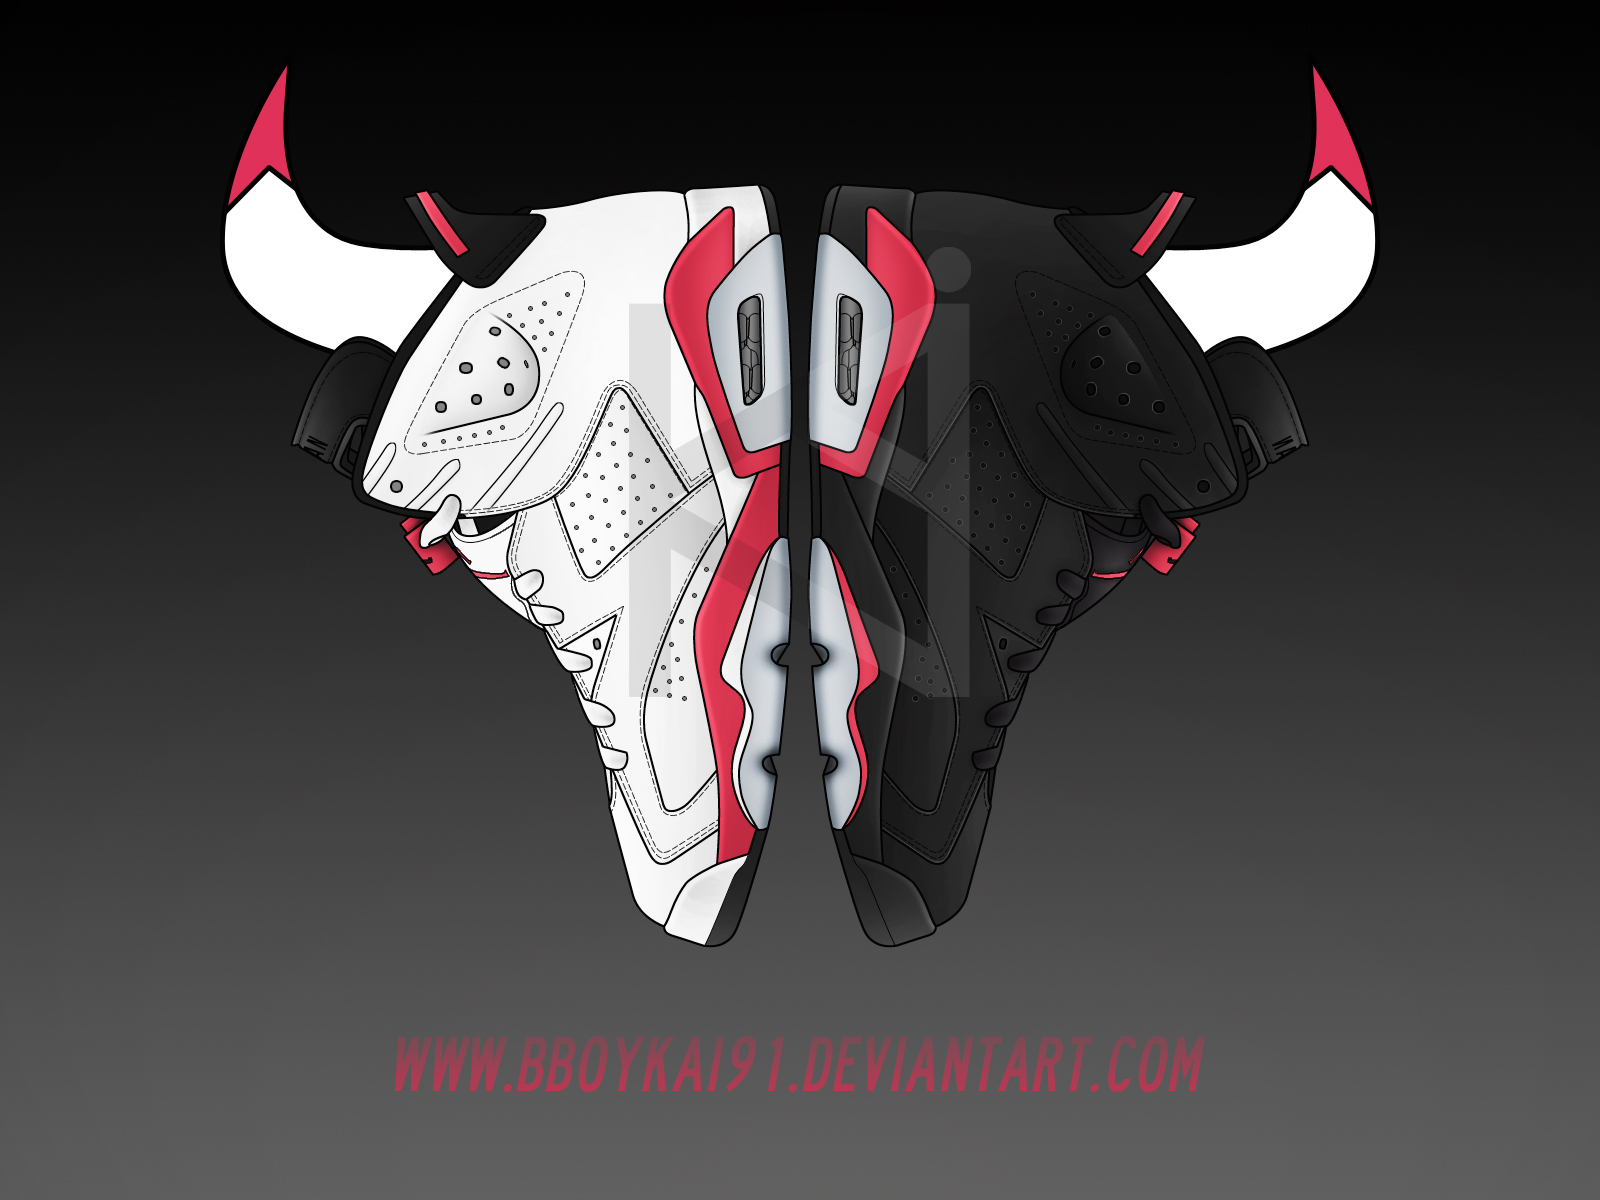 New Official Photoshop Vectors Graphic Design Thread Sole Collector